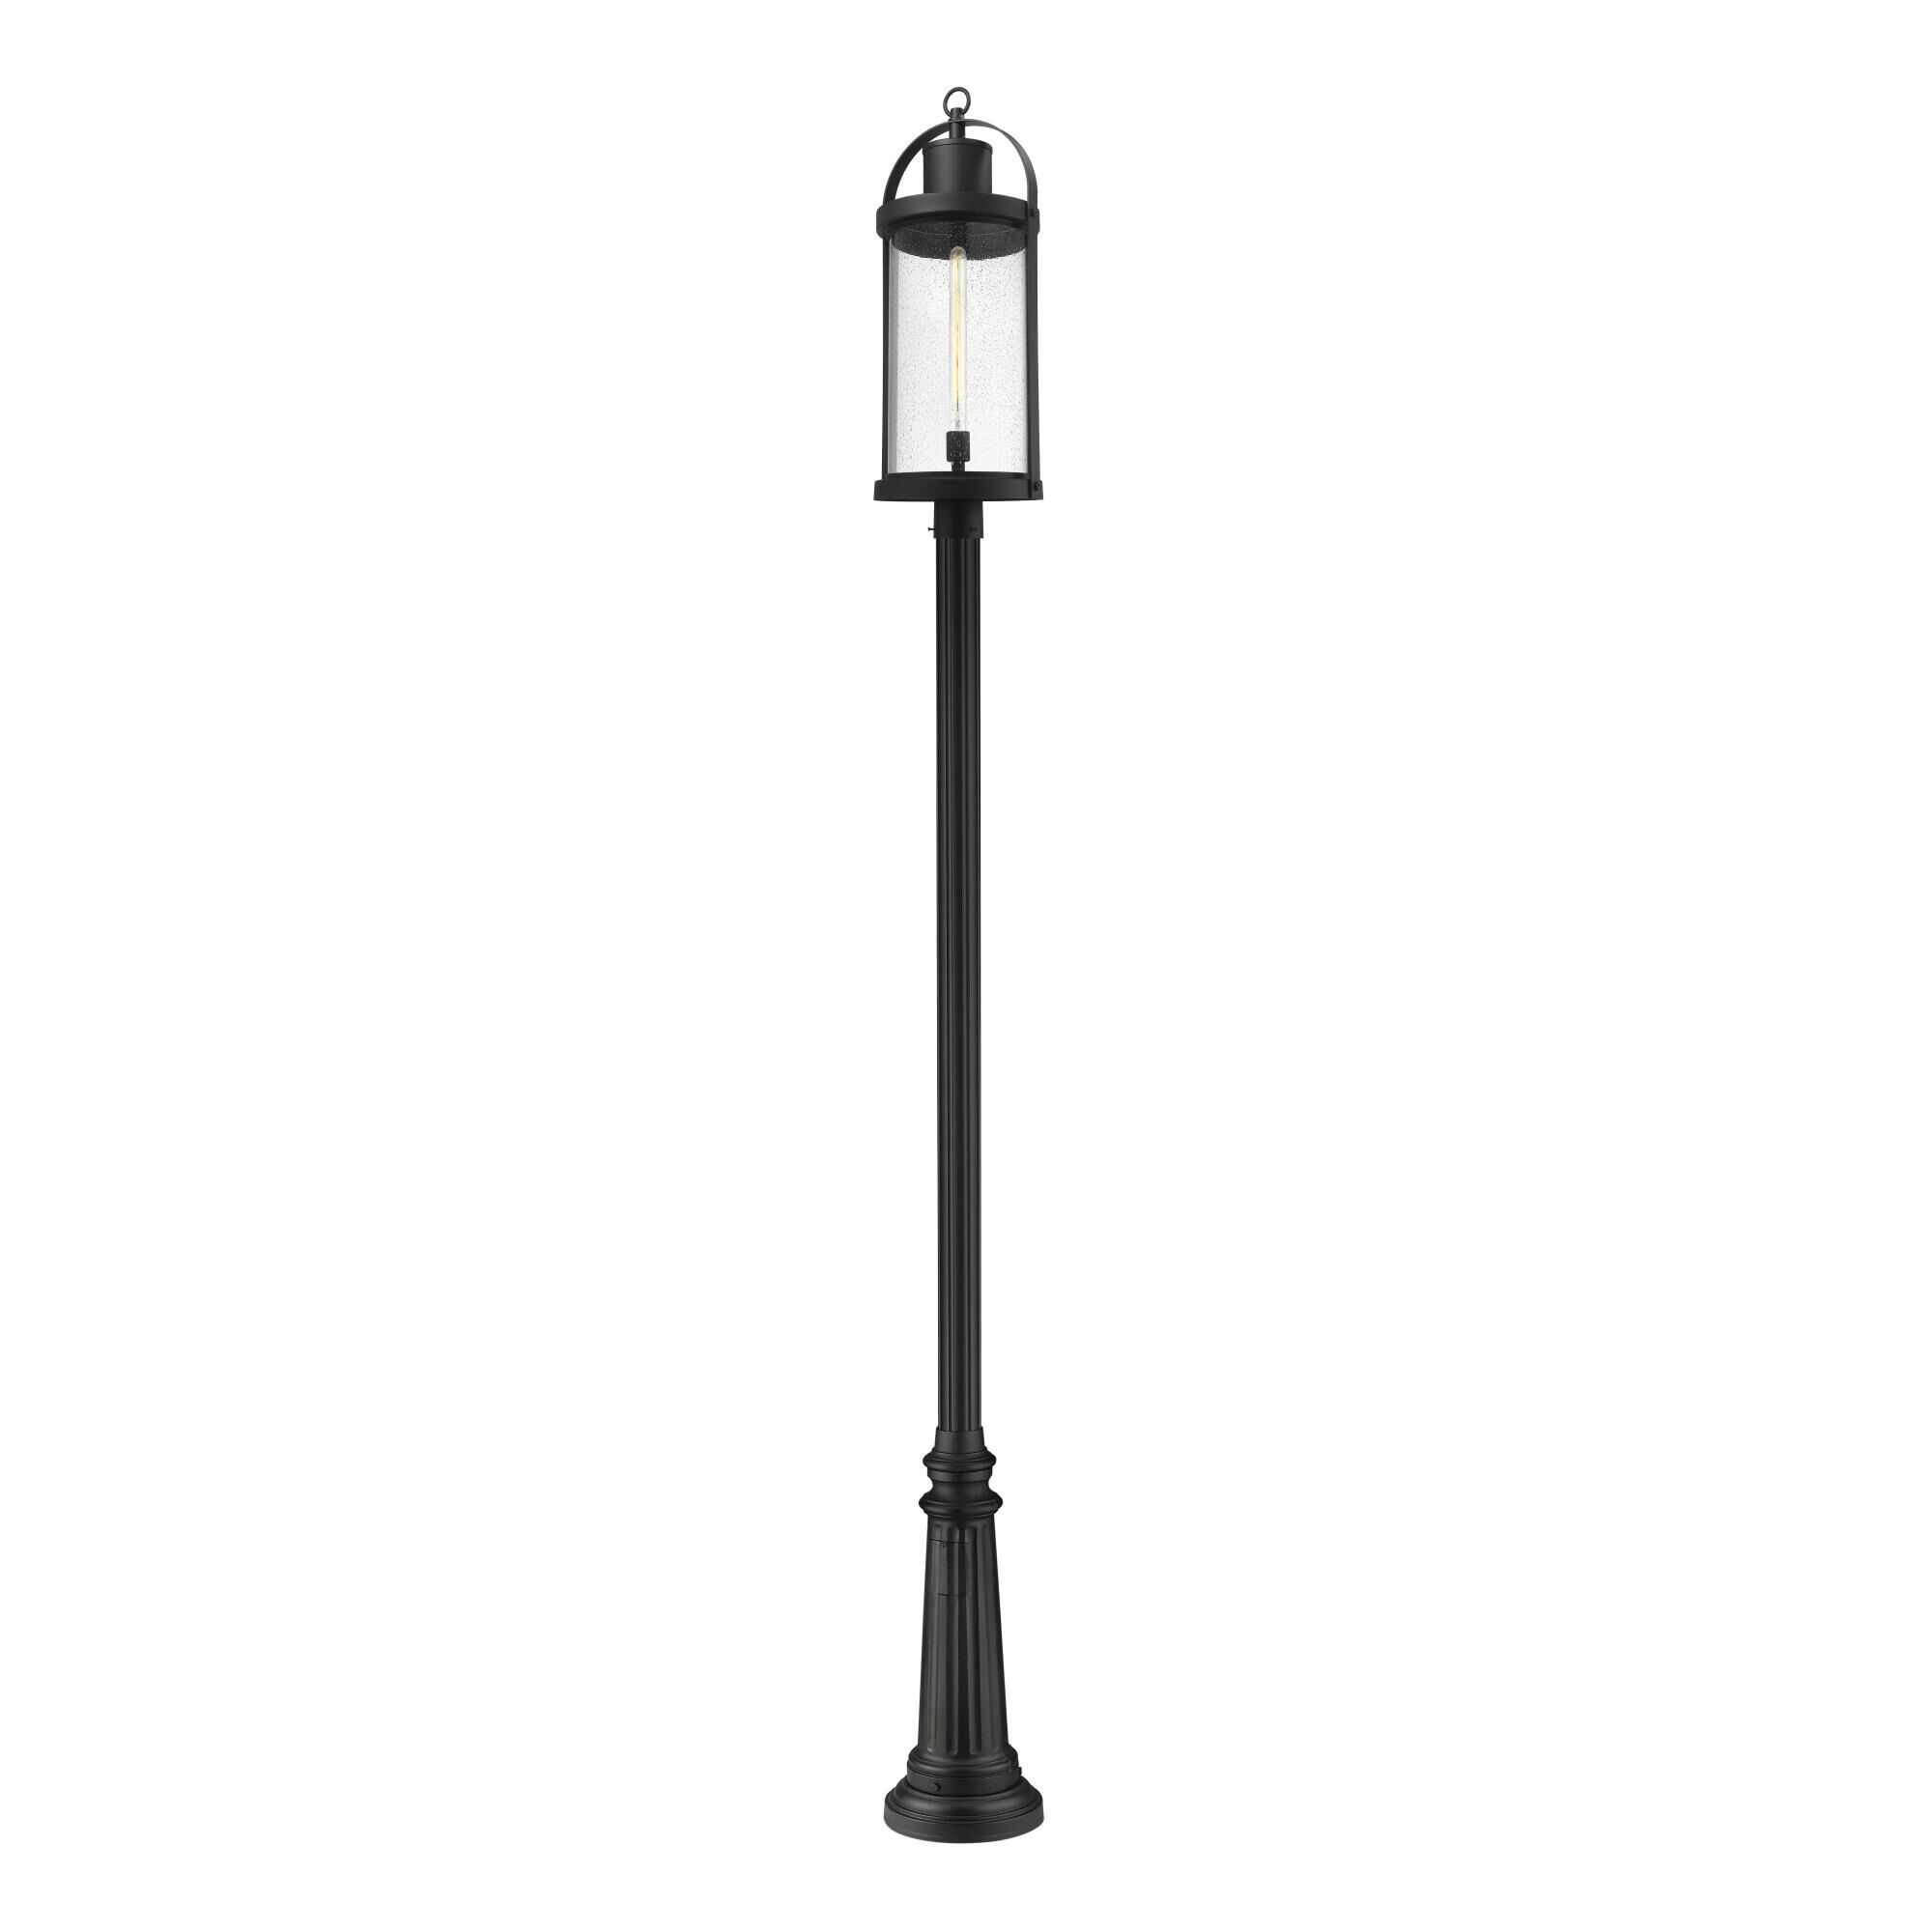 Photos - Floodlight / Street Light Z-Lite Roundhouse 125 Inch Tall Outdoor Post Lamp Roundhouse - 569PHXL-511